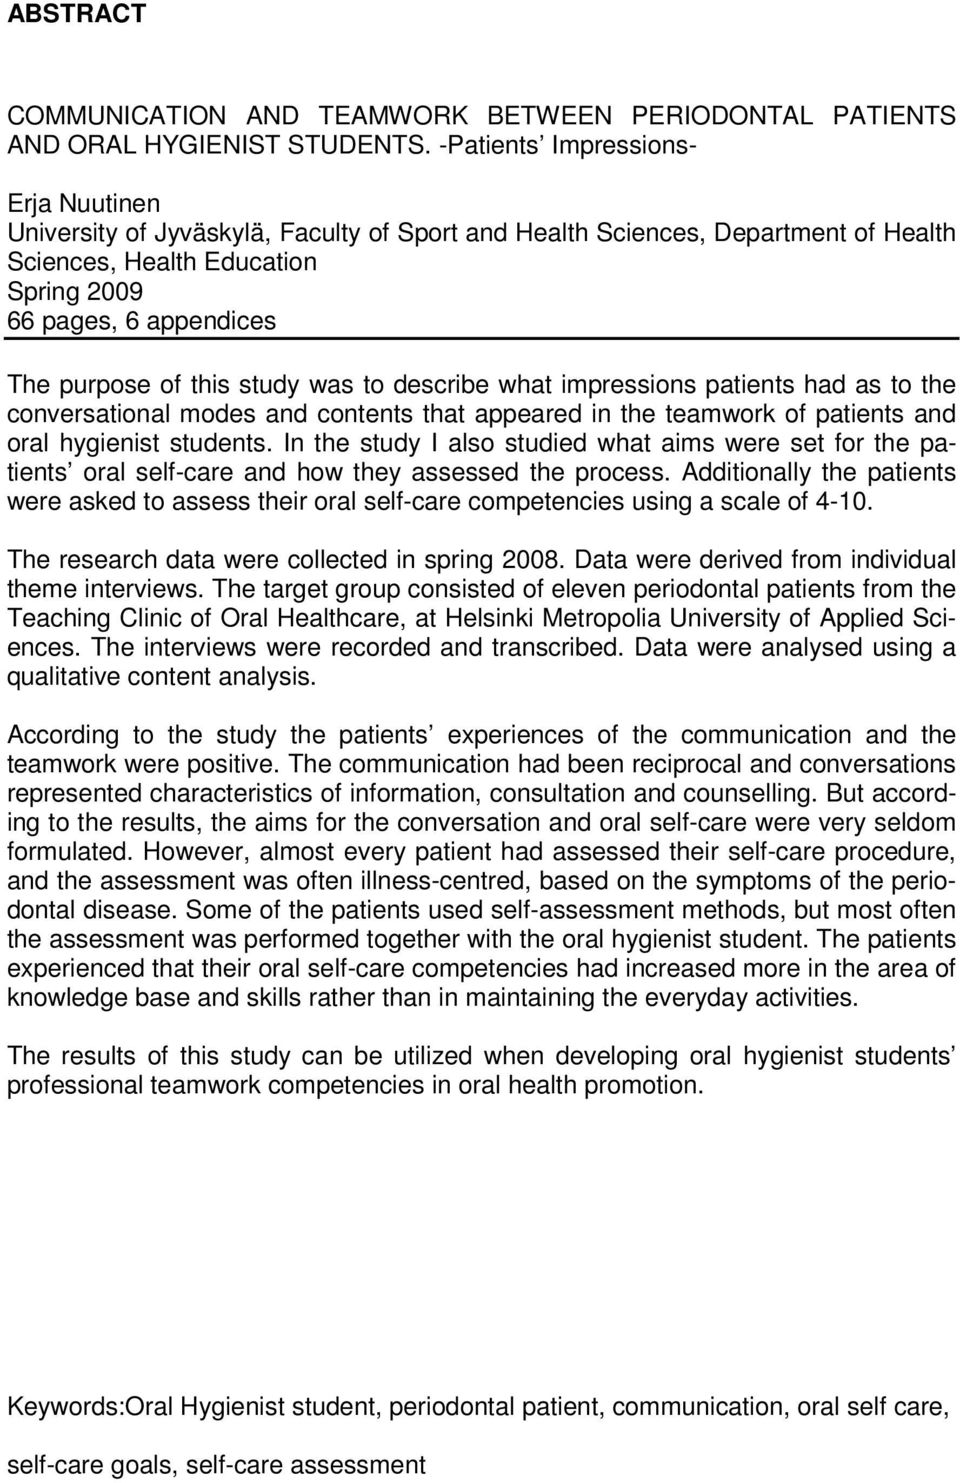 this study was to describe what impressions patients had as to the conversational modes and contents that appeared in the teamwork of patients and oral hygienist students.